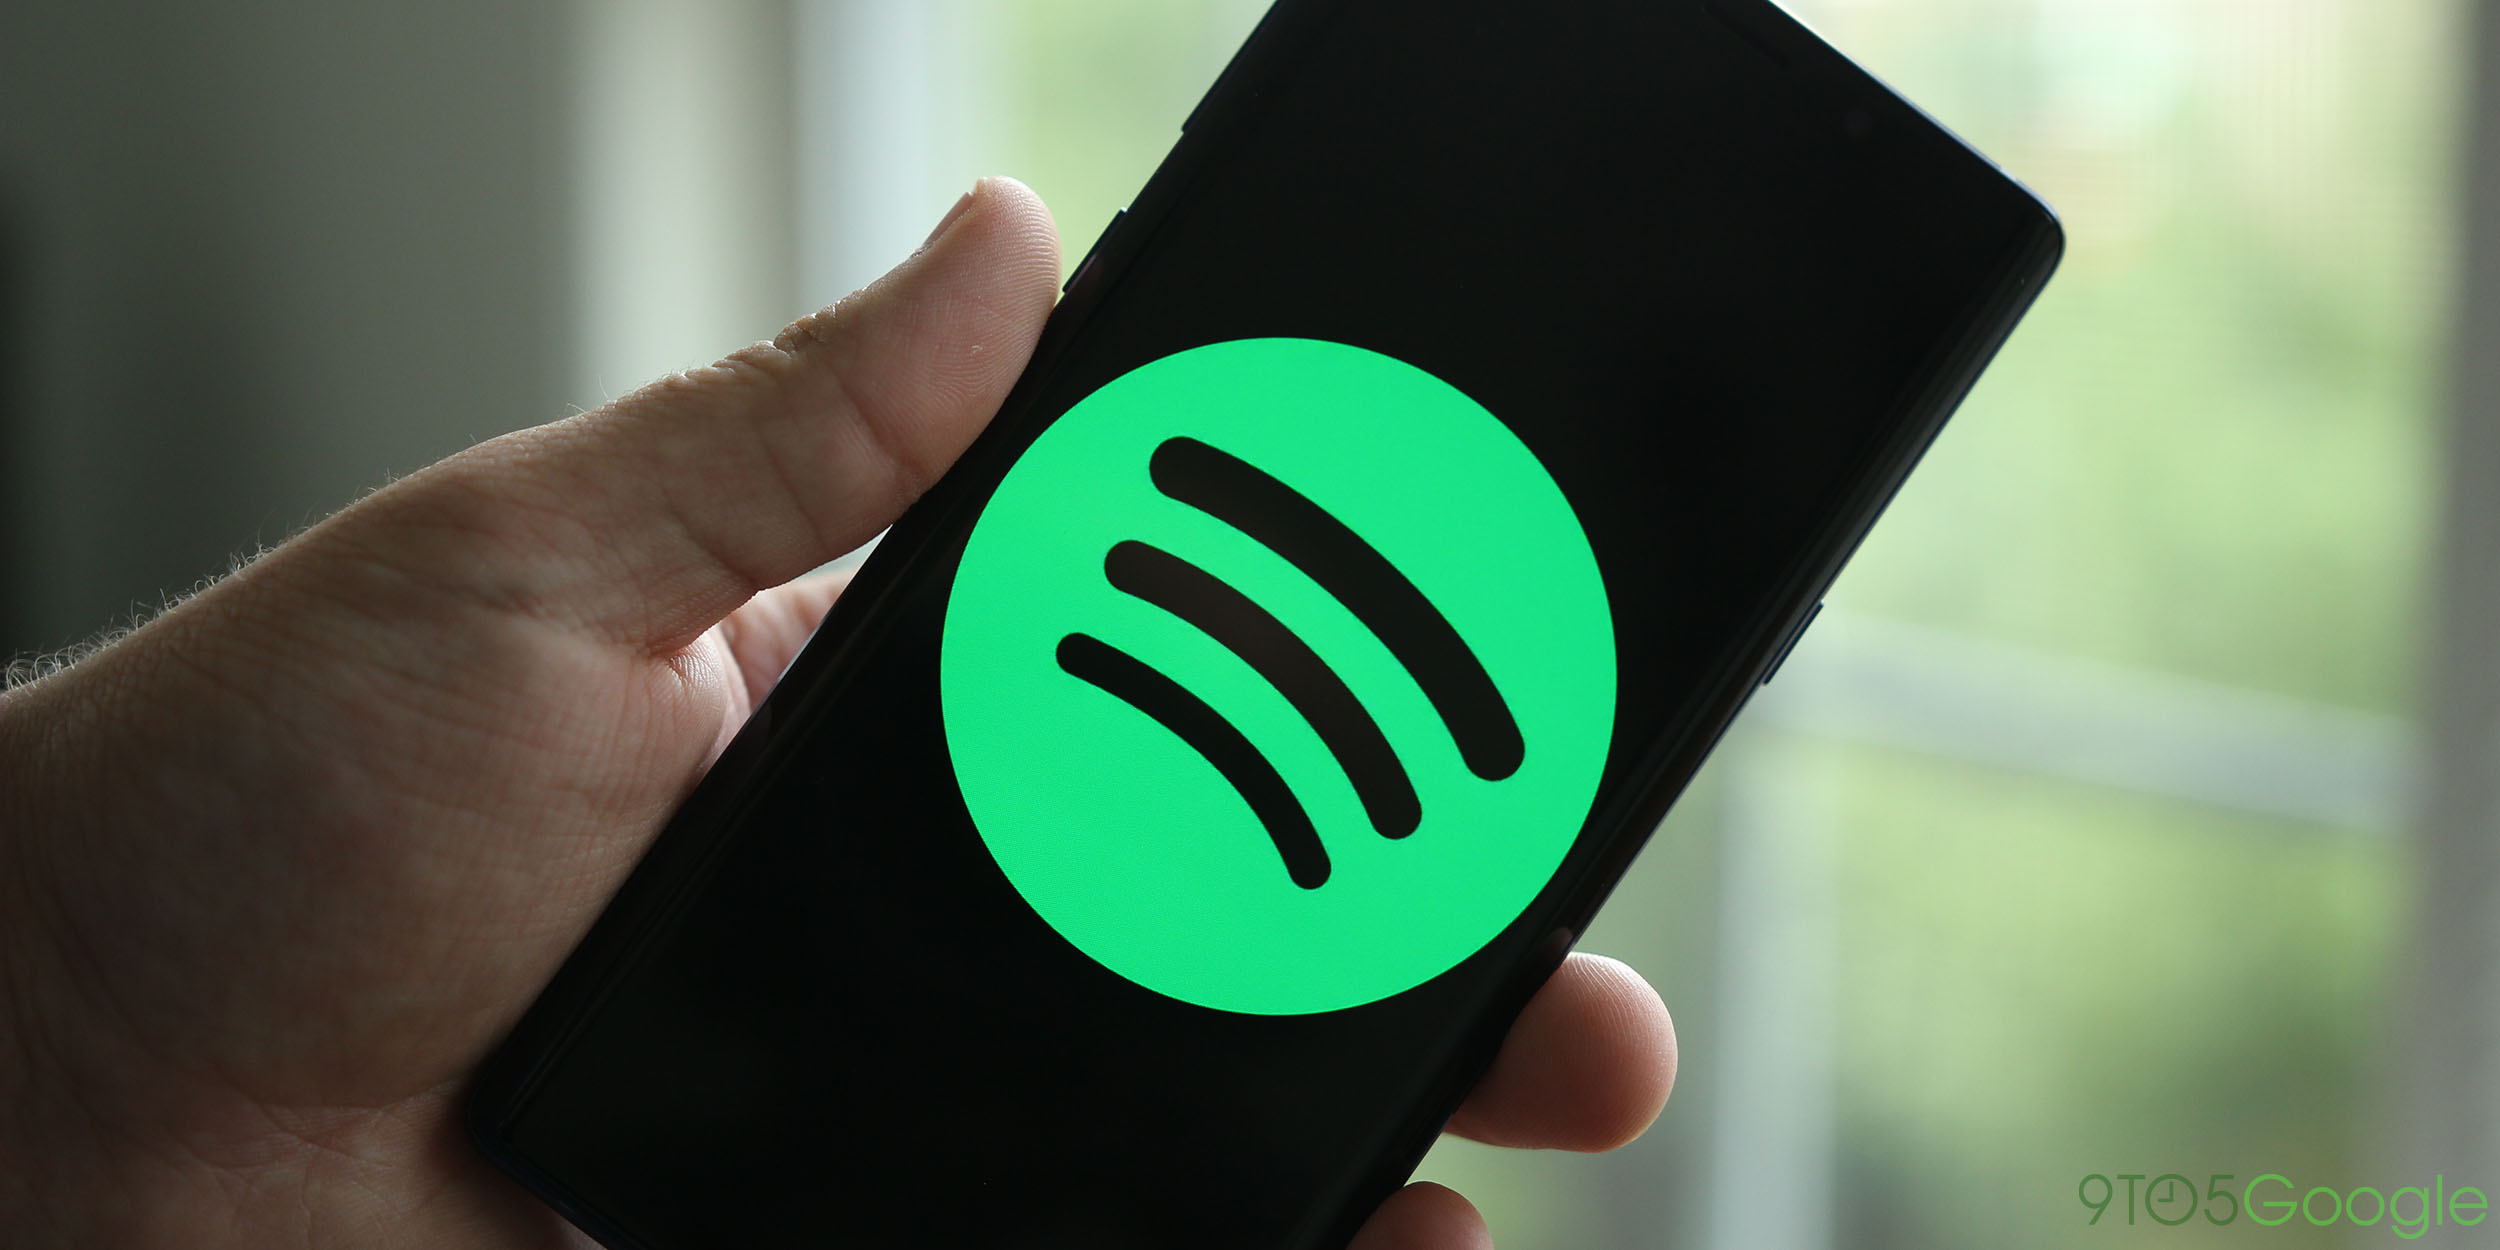 spotify offline mode android